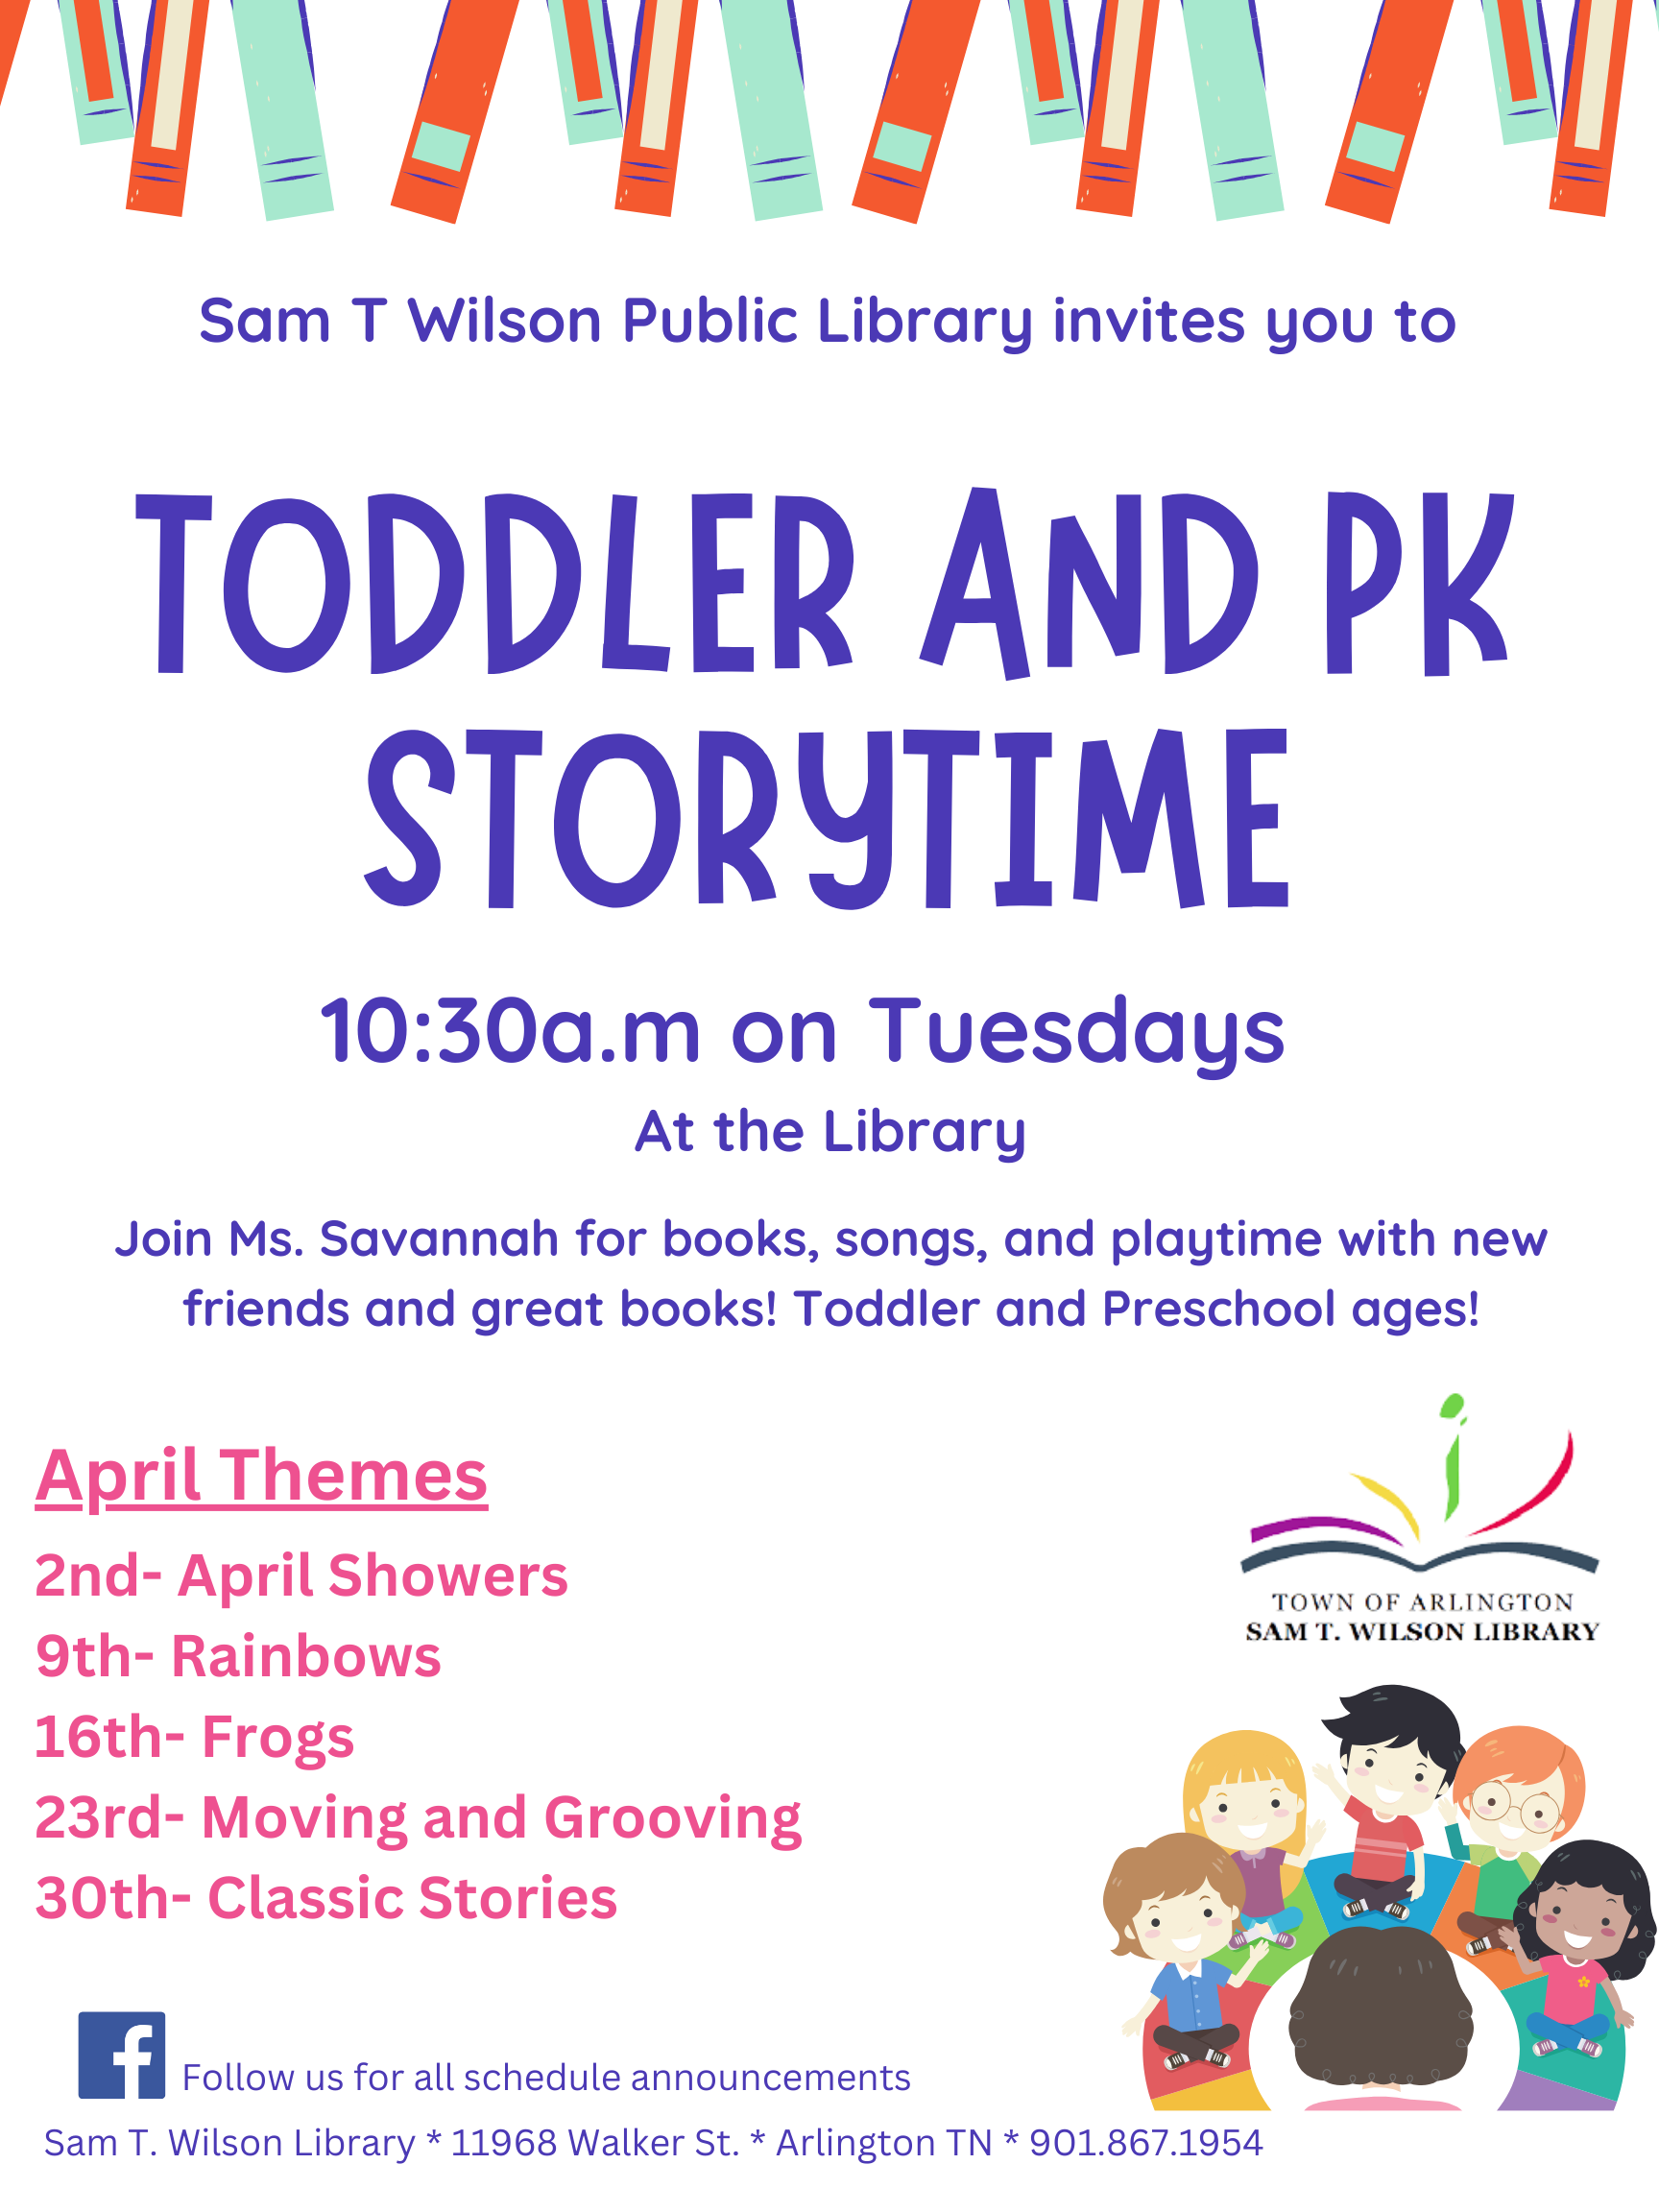 Toddler and PK Storytime schedule for April, meeting on Tuesdays at 10:30am